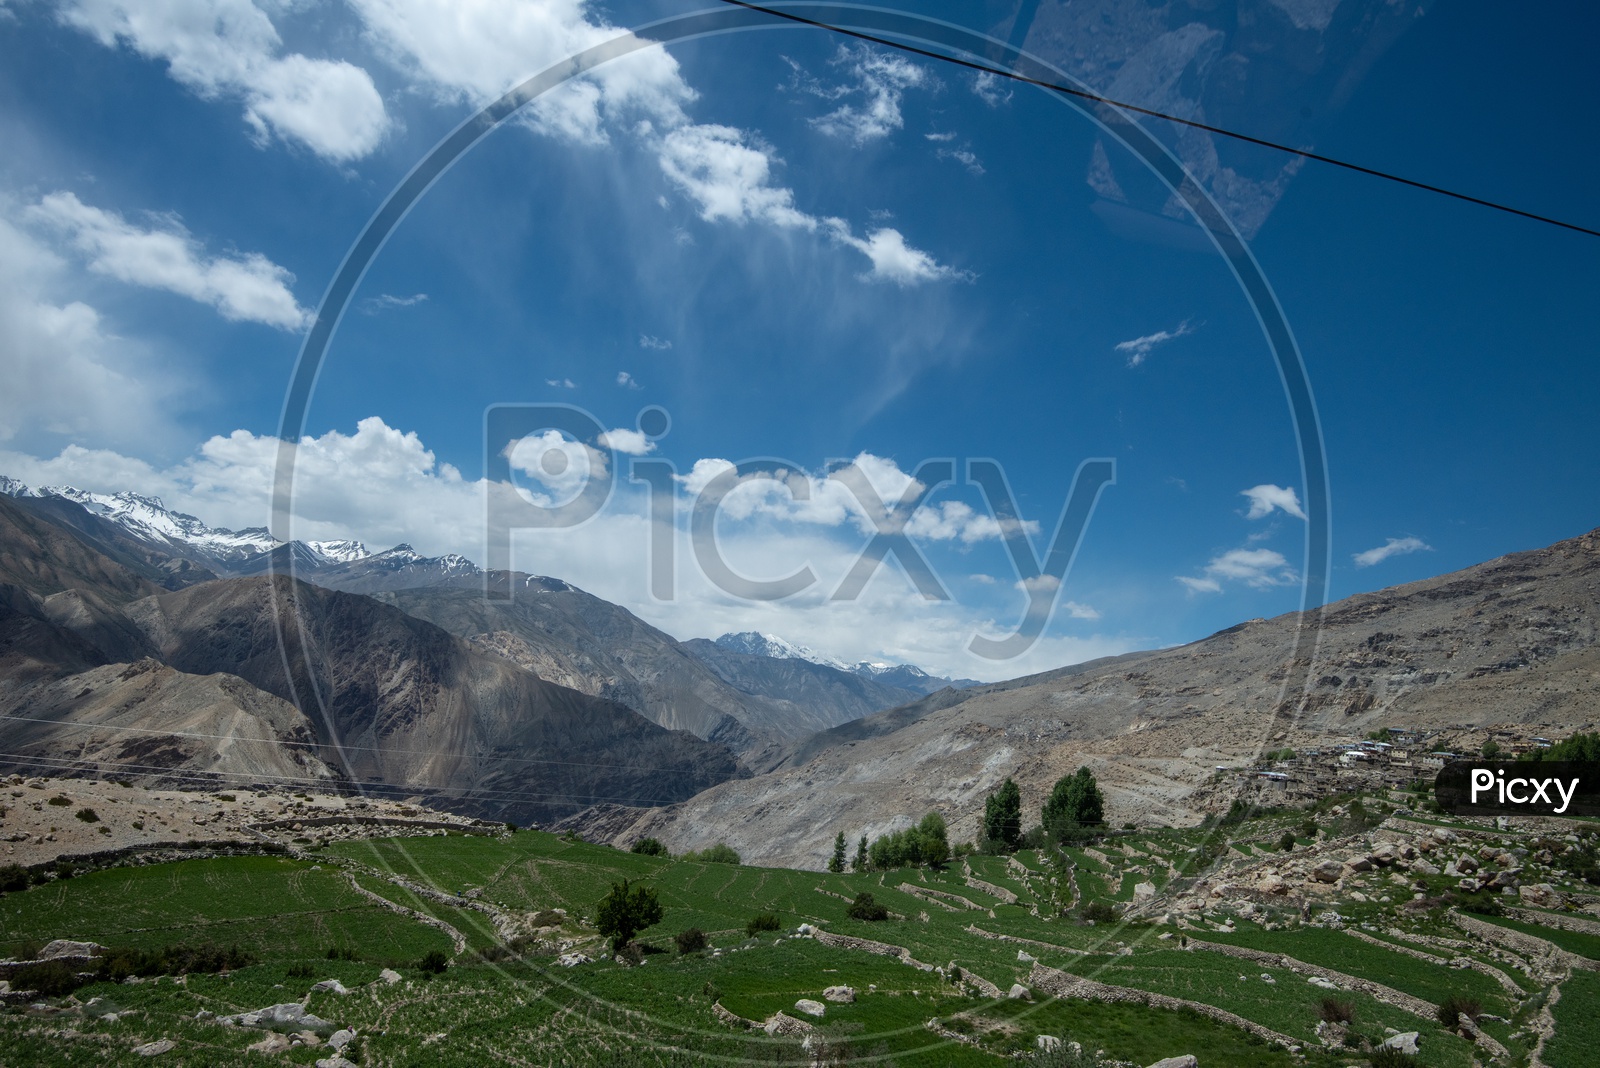 Snow capped Mountains of Spiti Valley